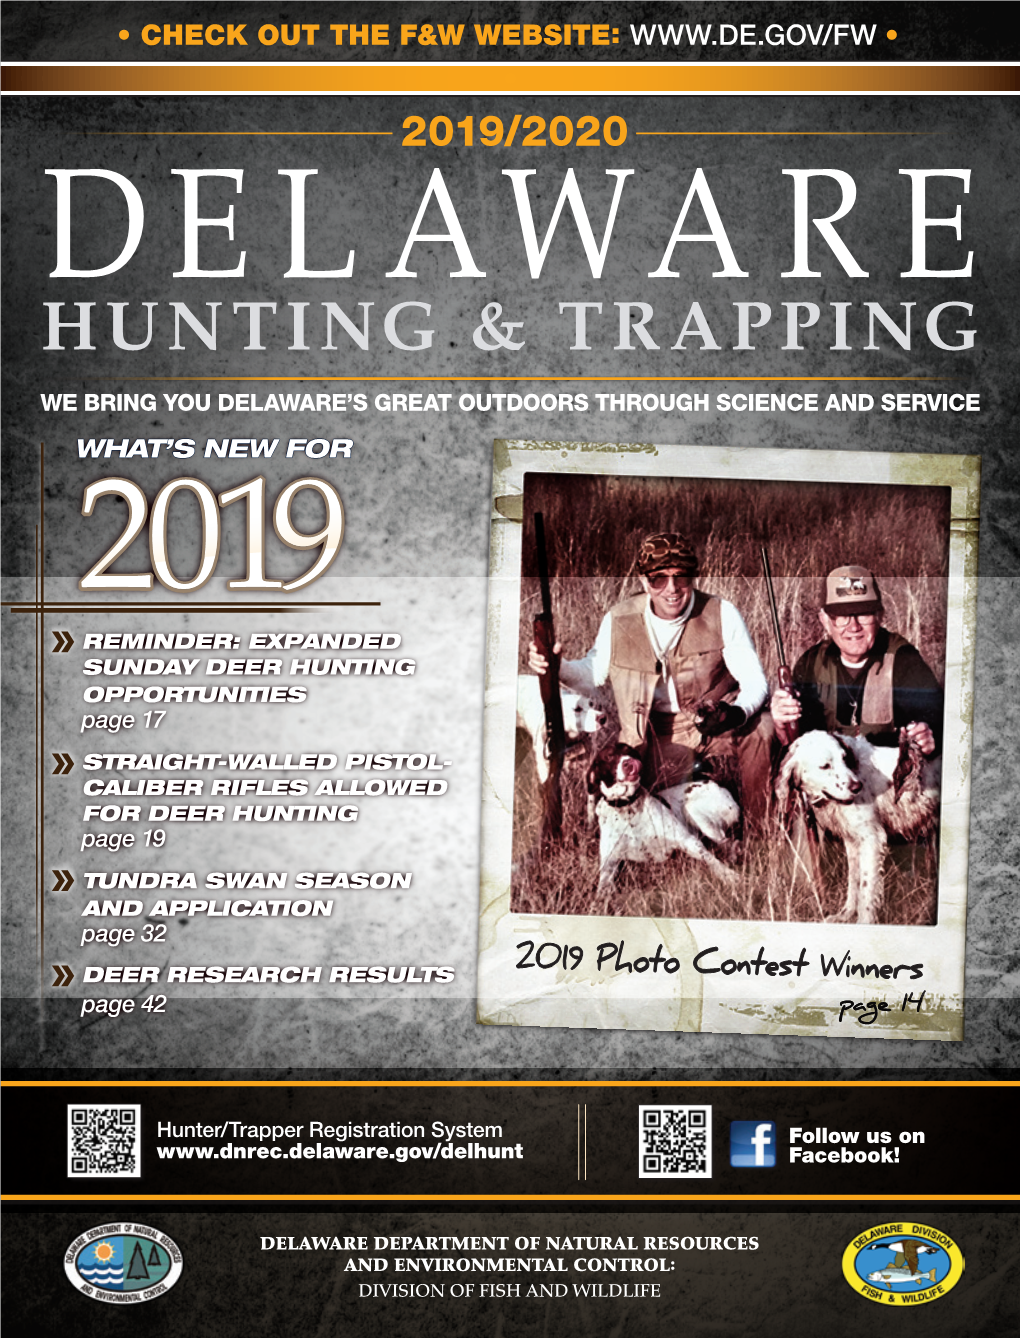 Delaware Hunting & Trapping